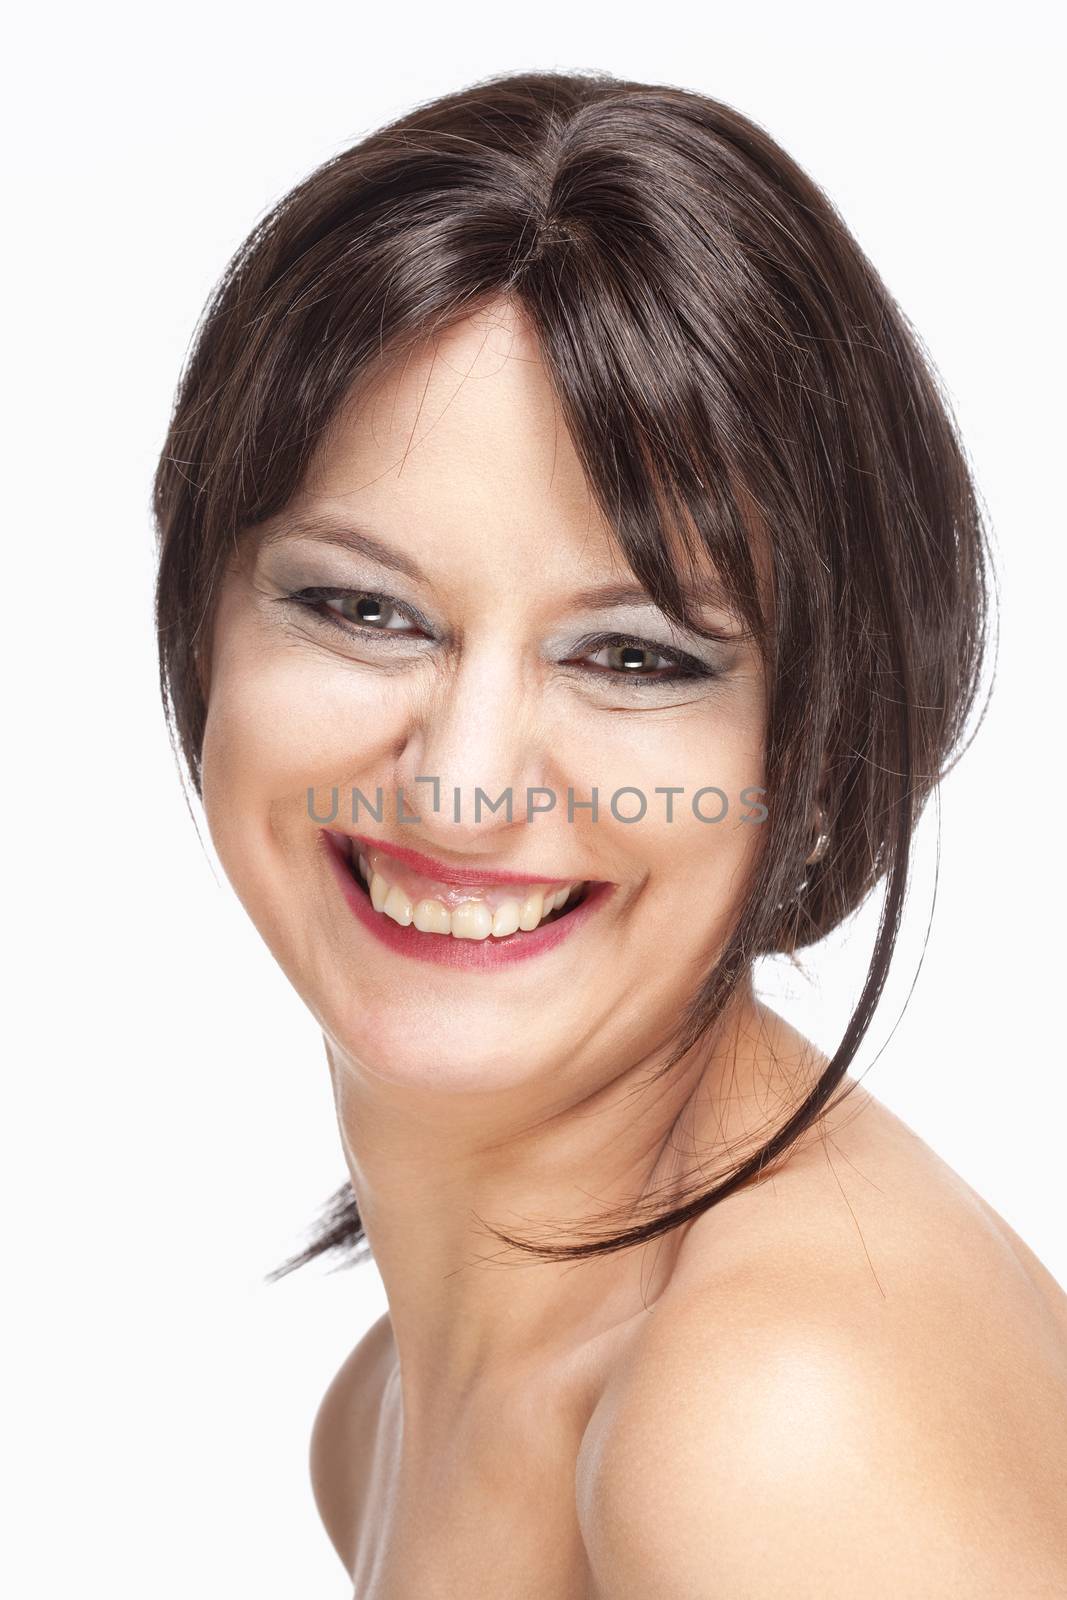 Woman with Brown Hair Smiling by courtyardpix